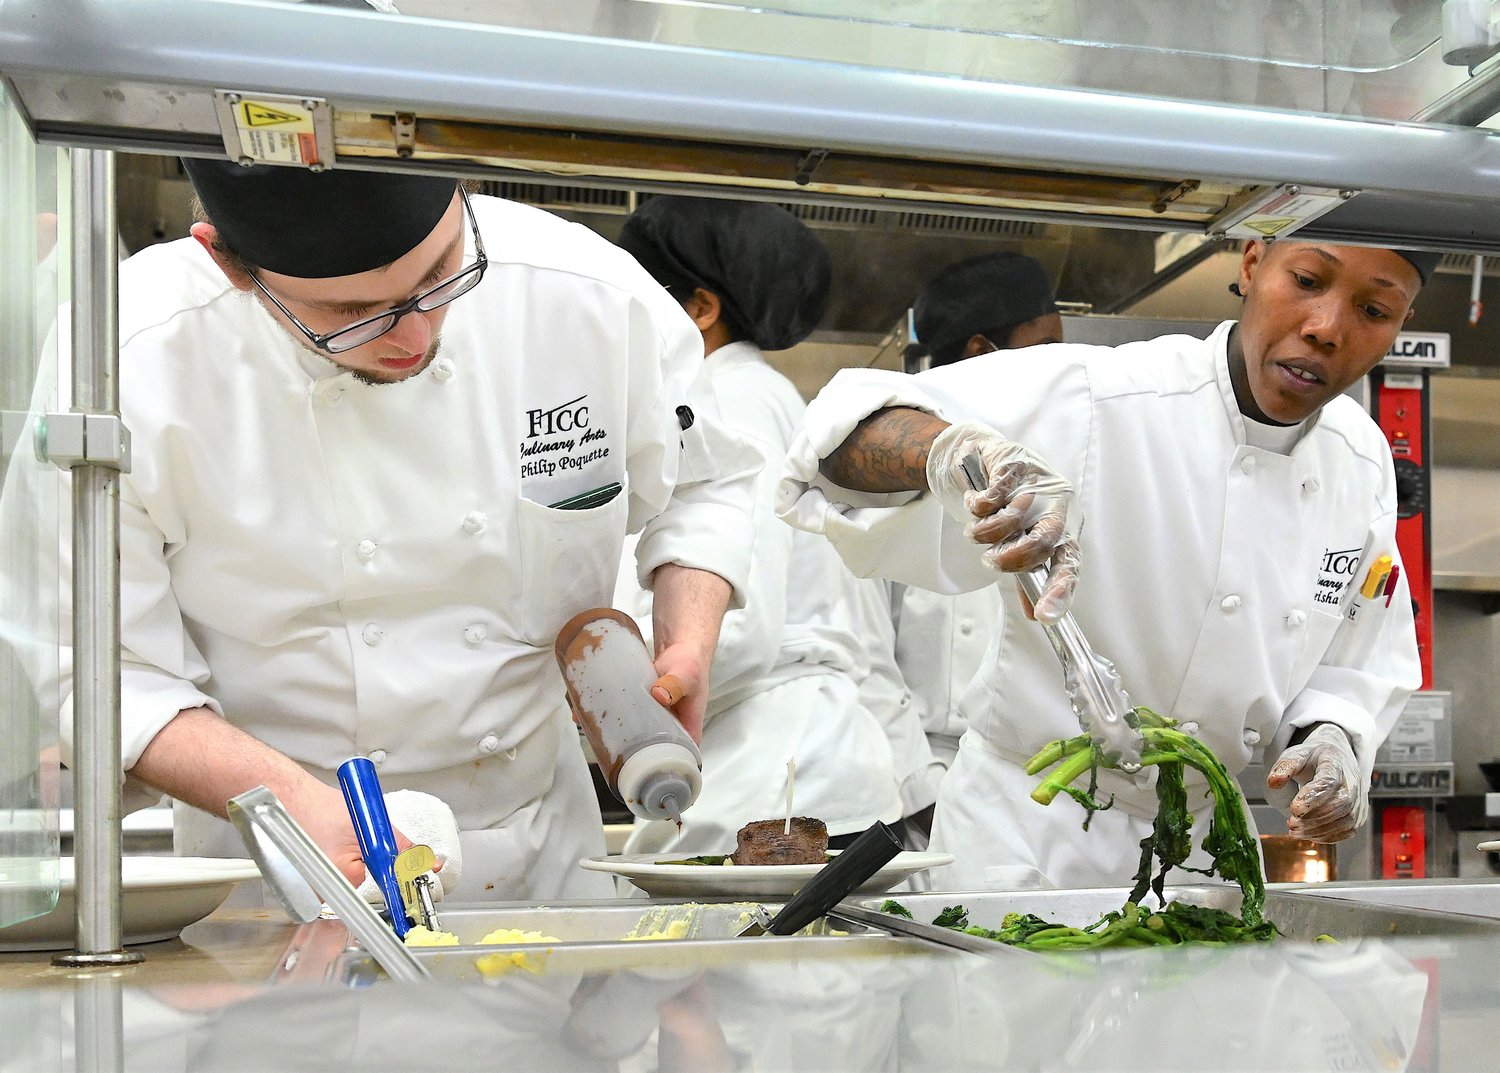 Culinary arts students at Fayetteville Technical Community College prepare a meal at the college to gain real-world experience in food preparation and presentation.